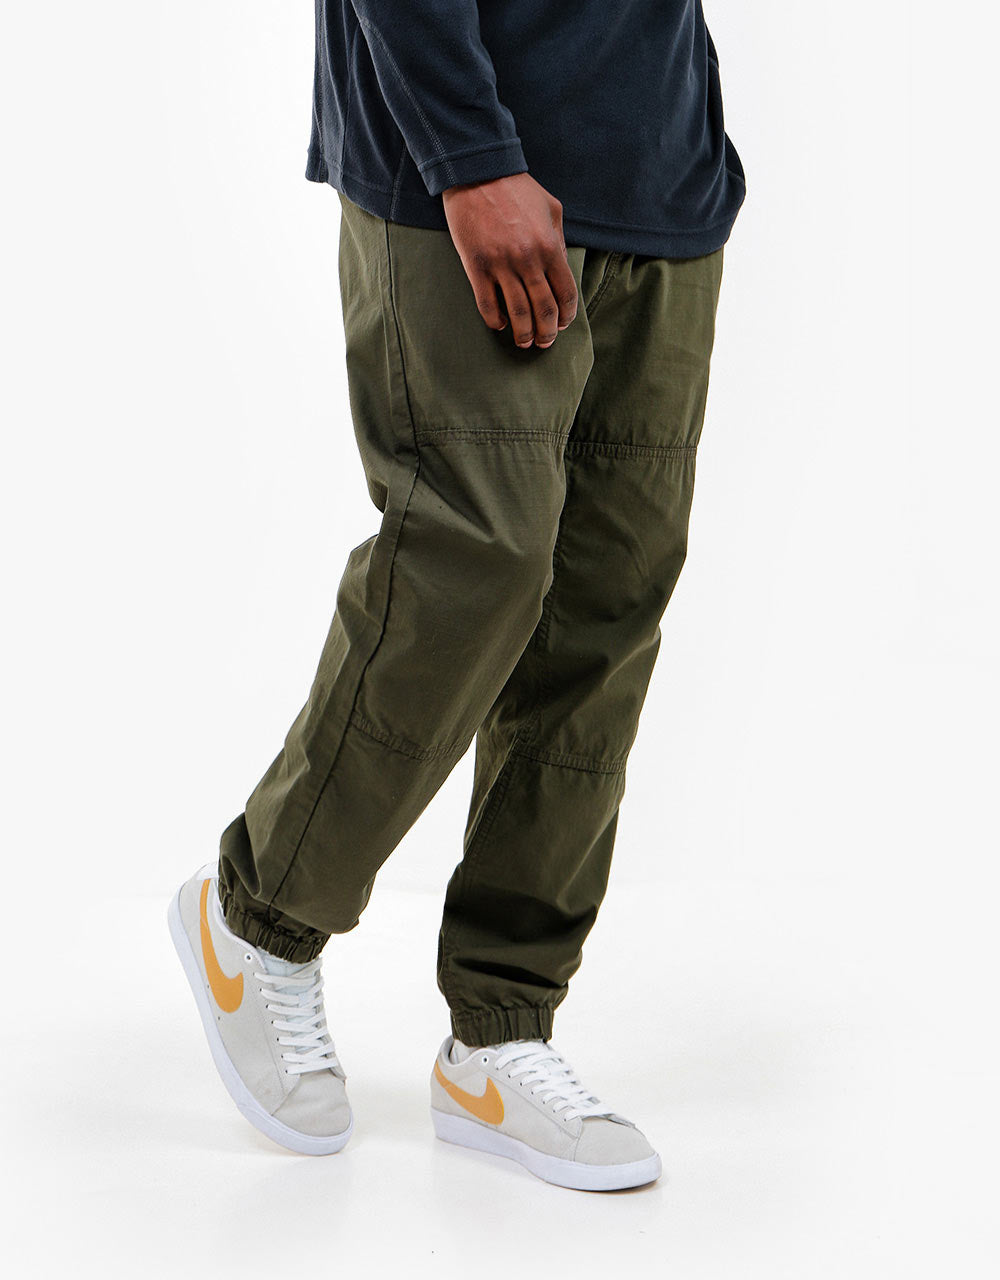 Carhartt WIP Marshall Jogger - Cypress (Rinsed) – Route One